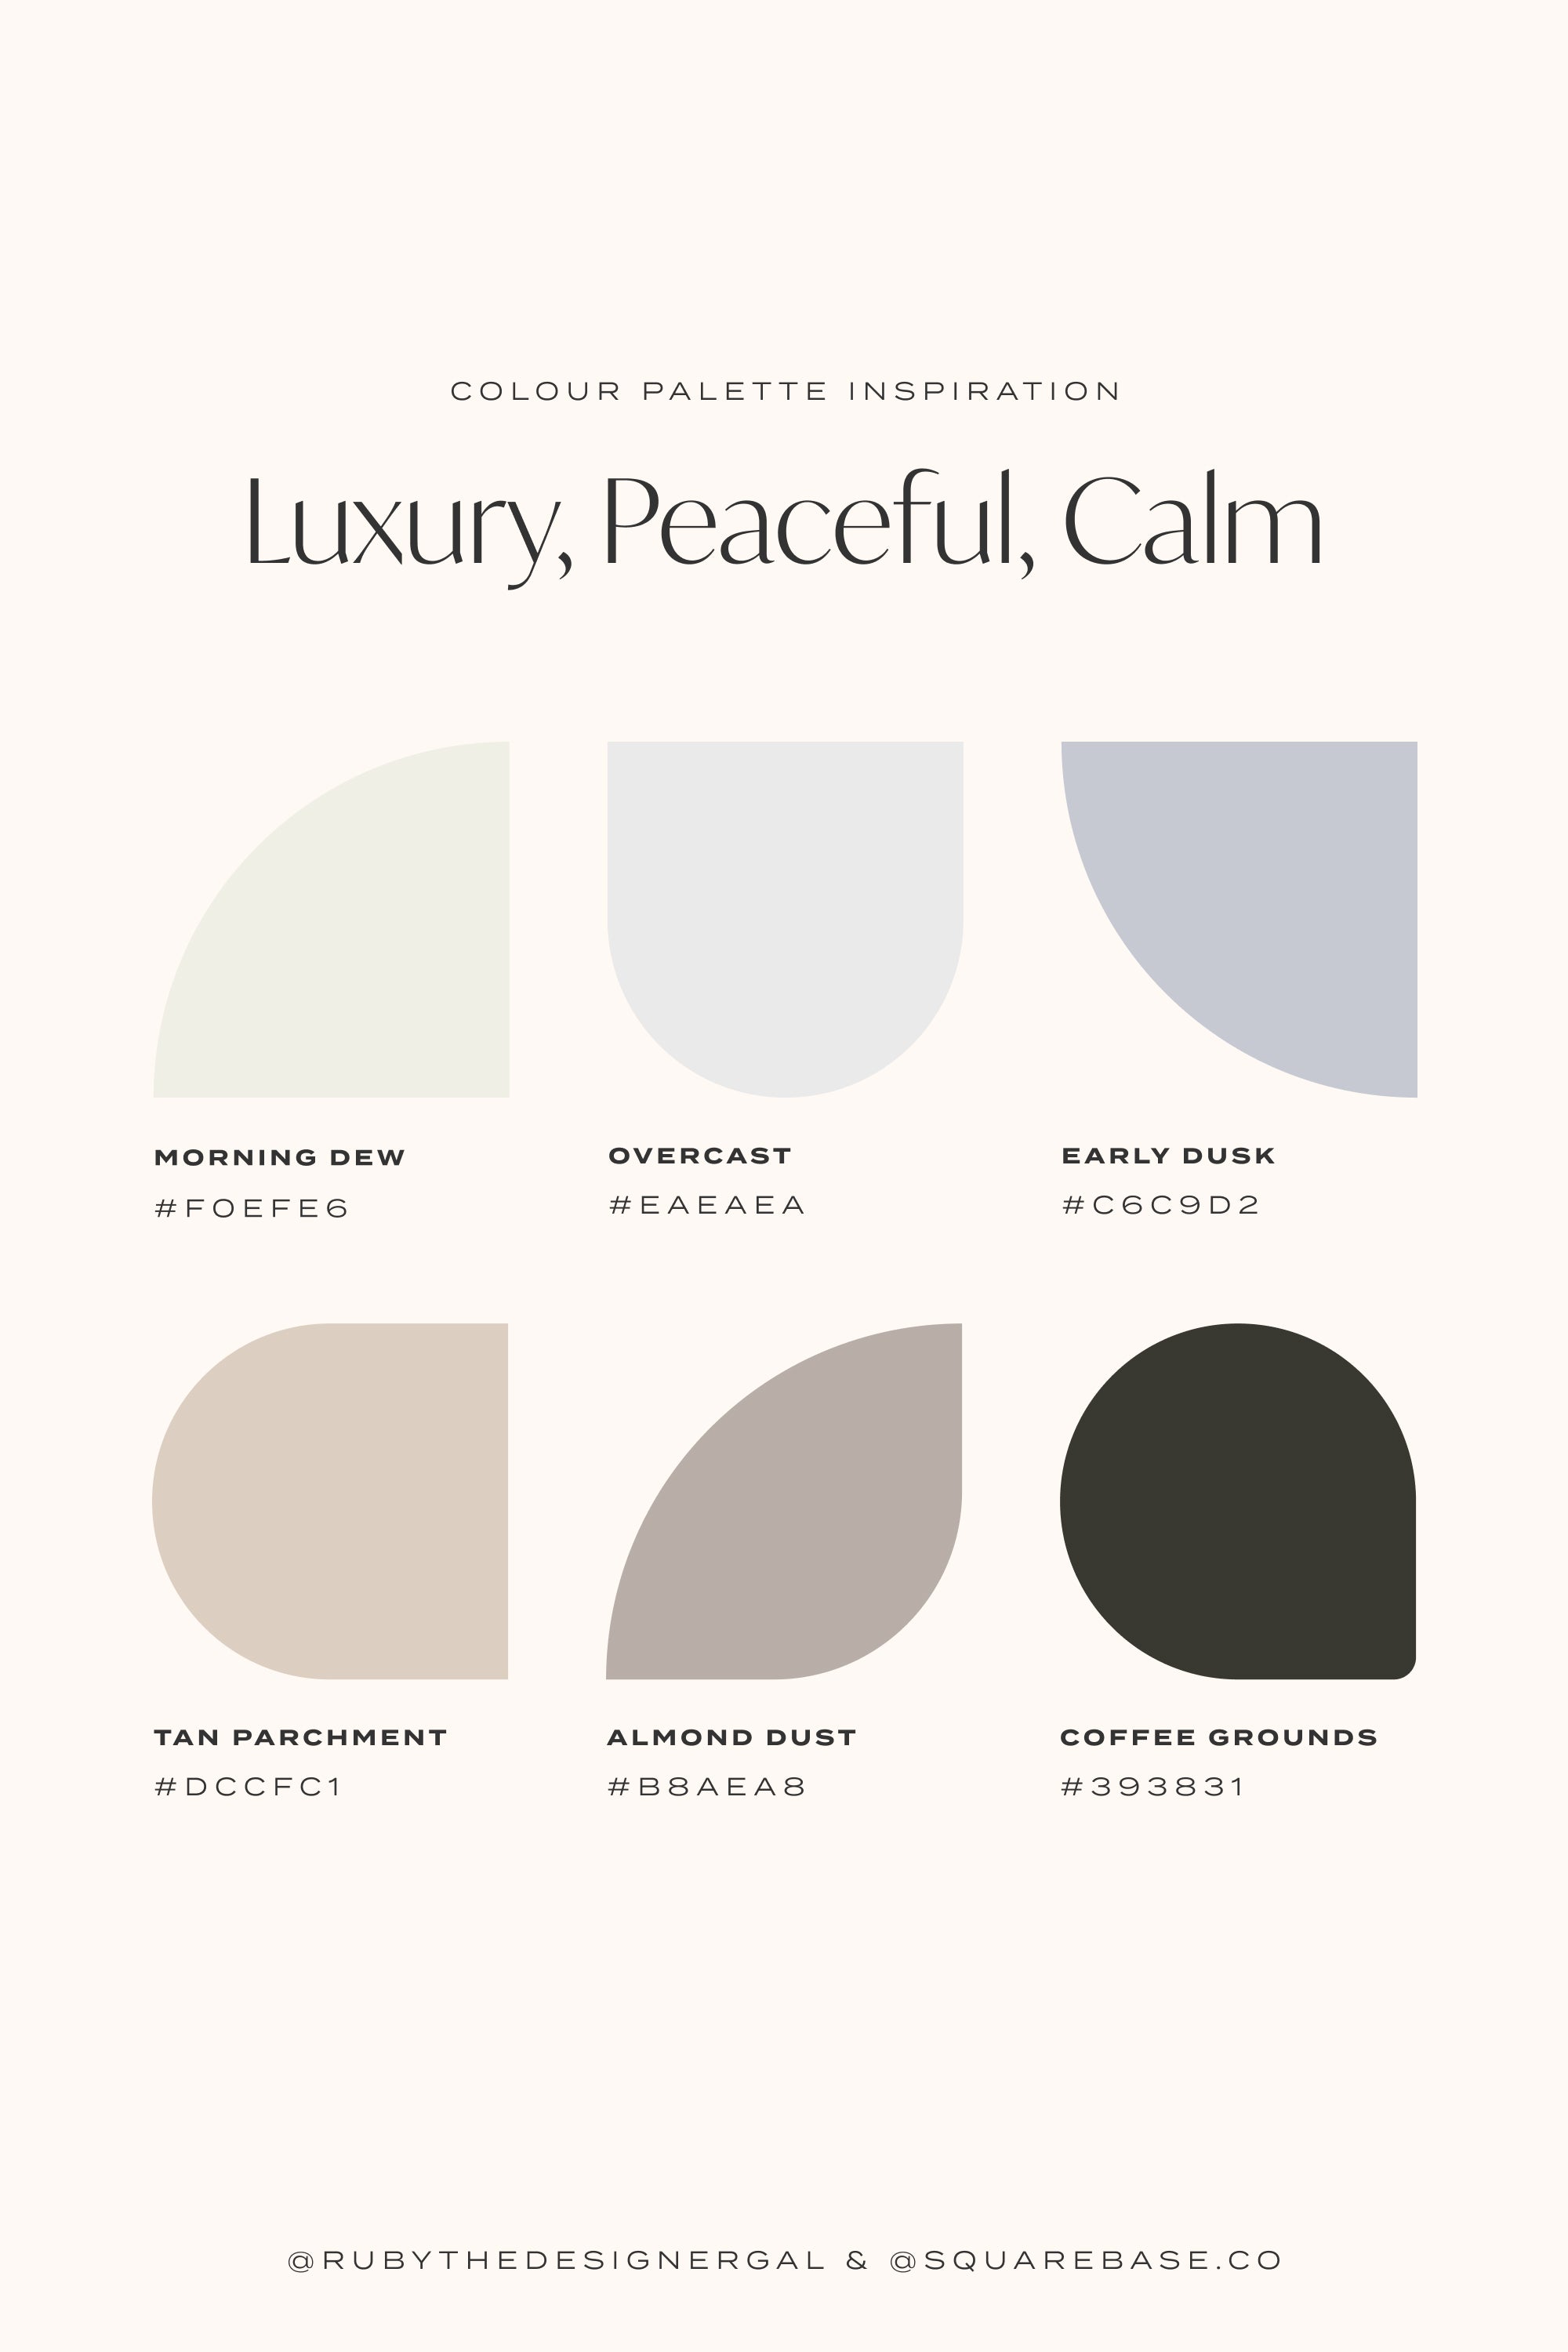 Luxury, Peaceful and Calm - Luxury Colour Palettes for Your Brand